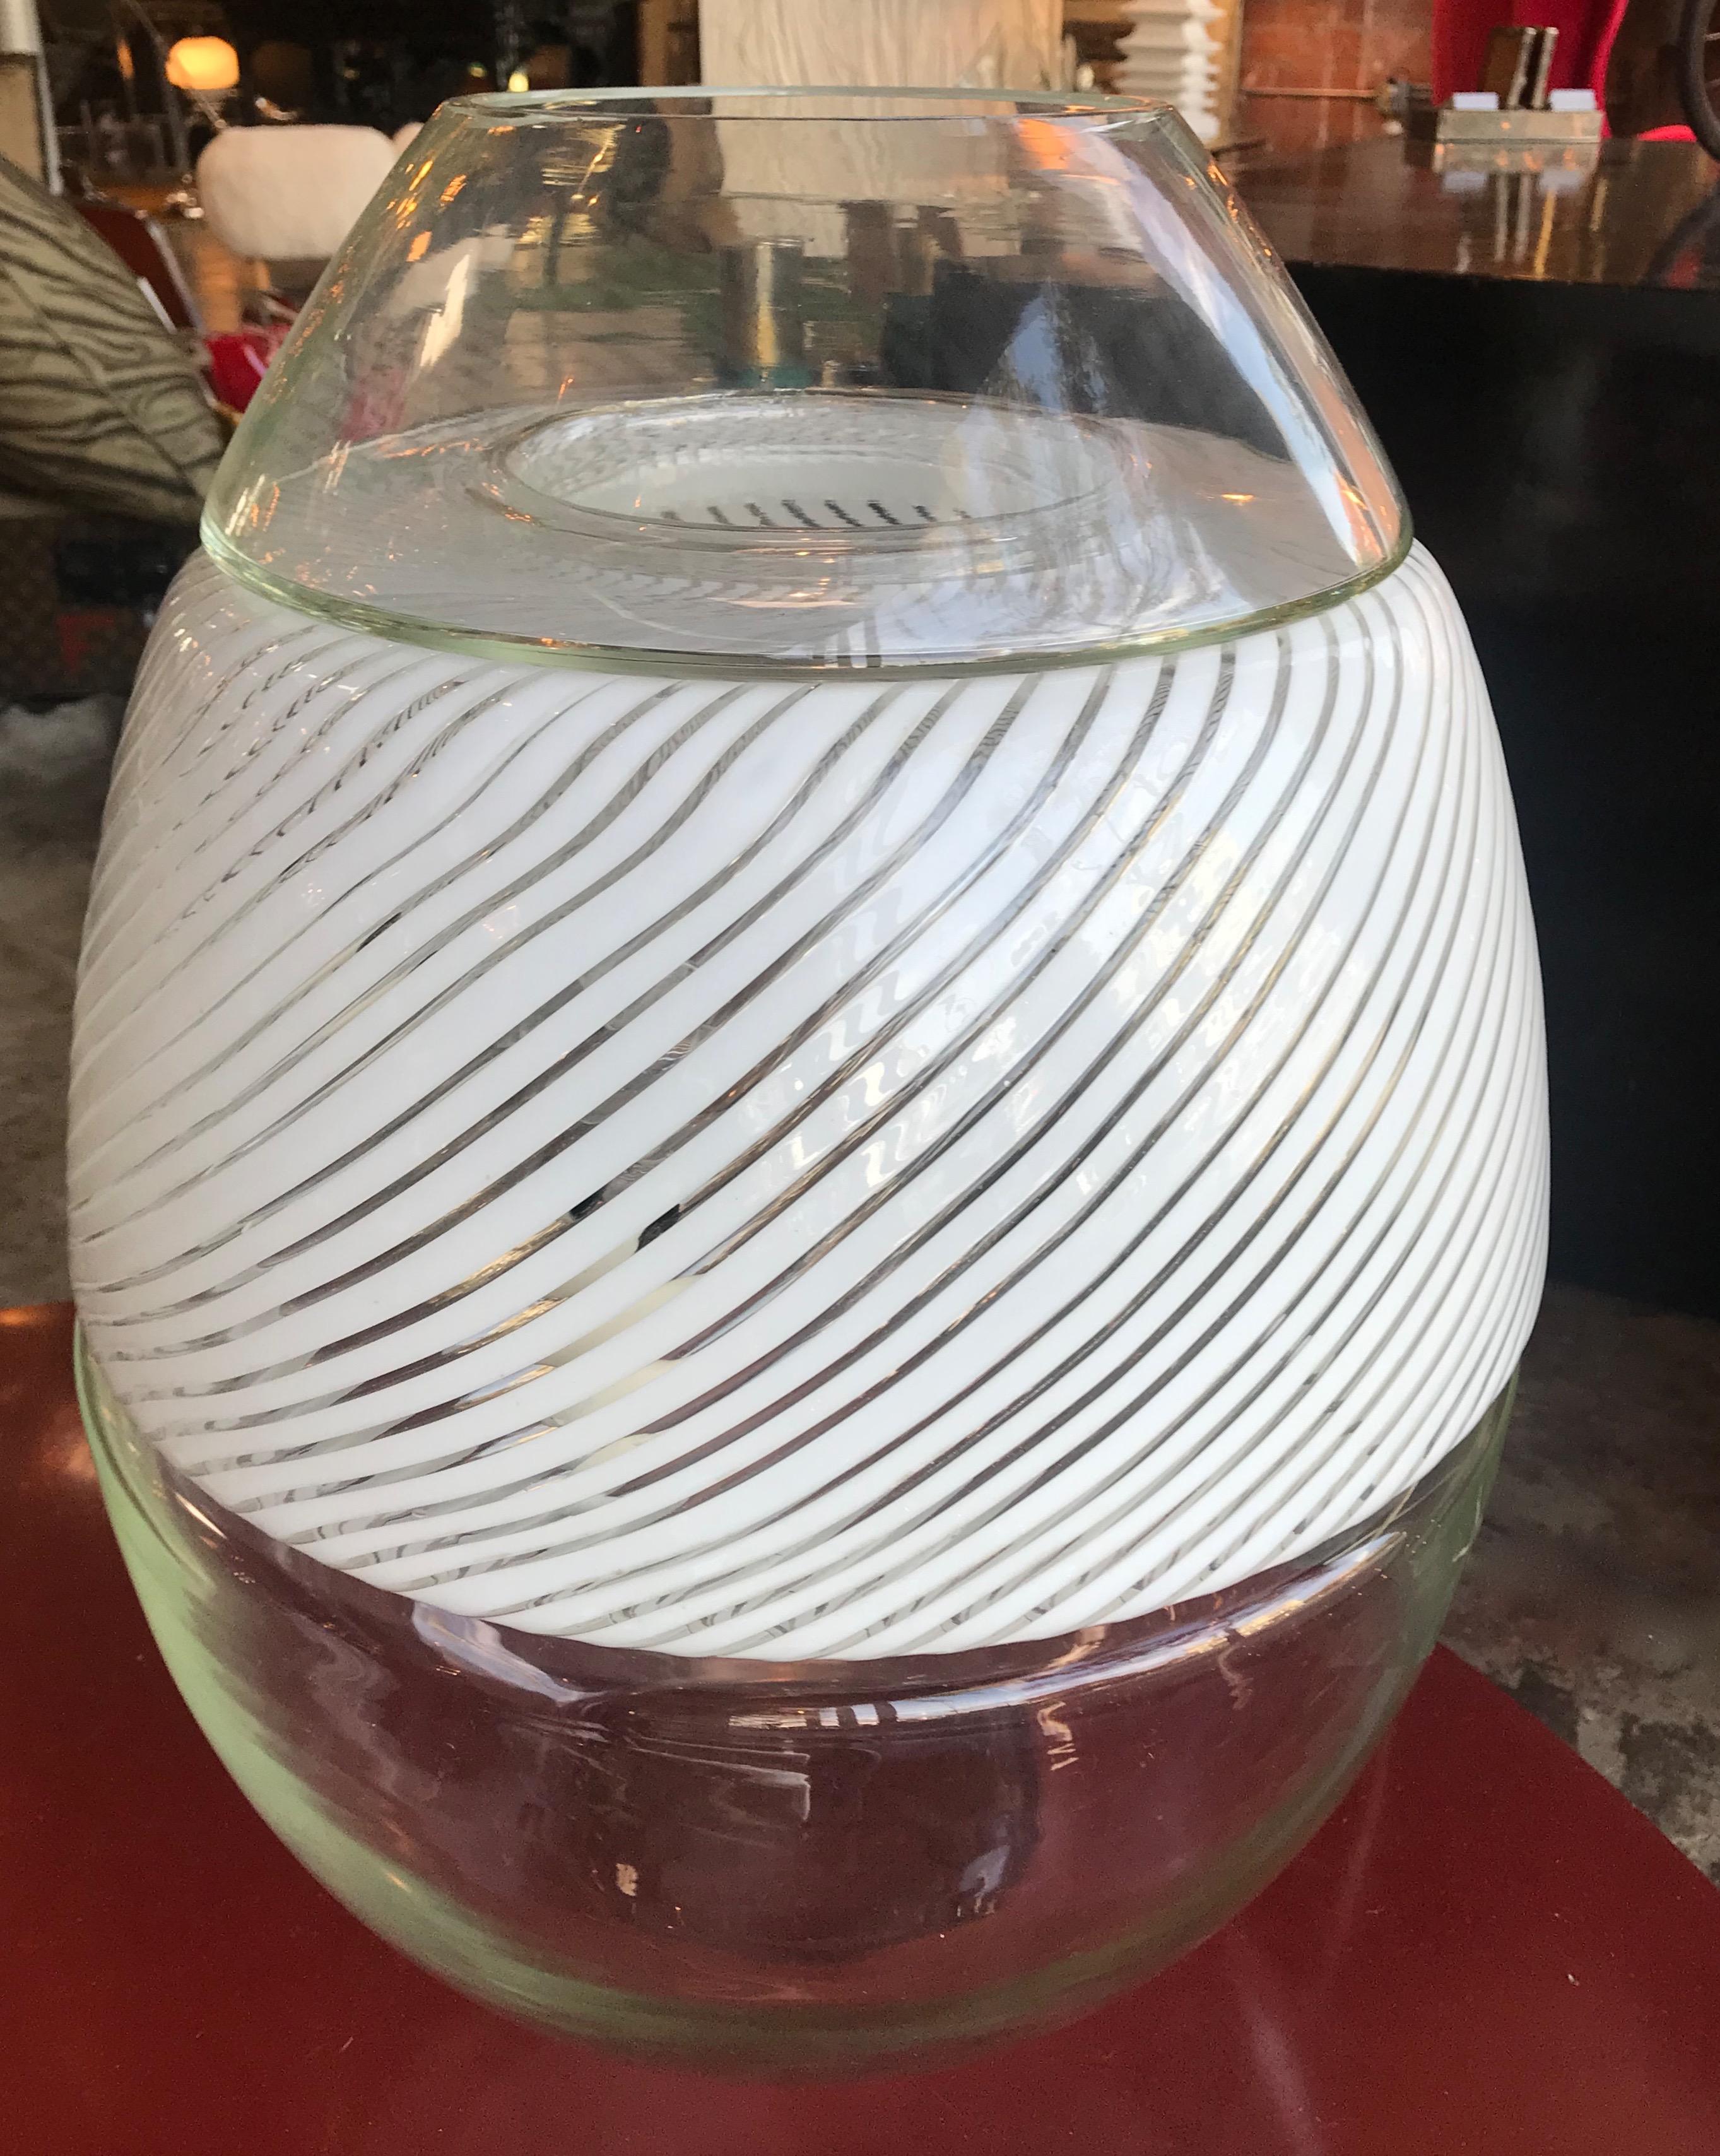 Large swirled glass egg lamp and vase by Vetri Murano, Italy 1970s.
Double function: Lamp and vase. H: 21 in.!
Rare piece of art glass. This table lamp and vase was made in the 1970s by Maestri Vetrai in Italy. It is comprised of expertly